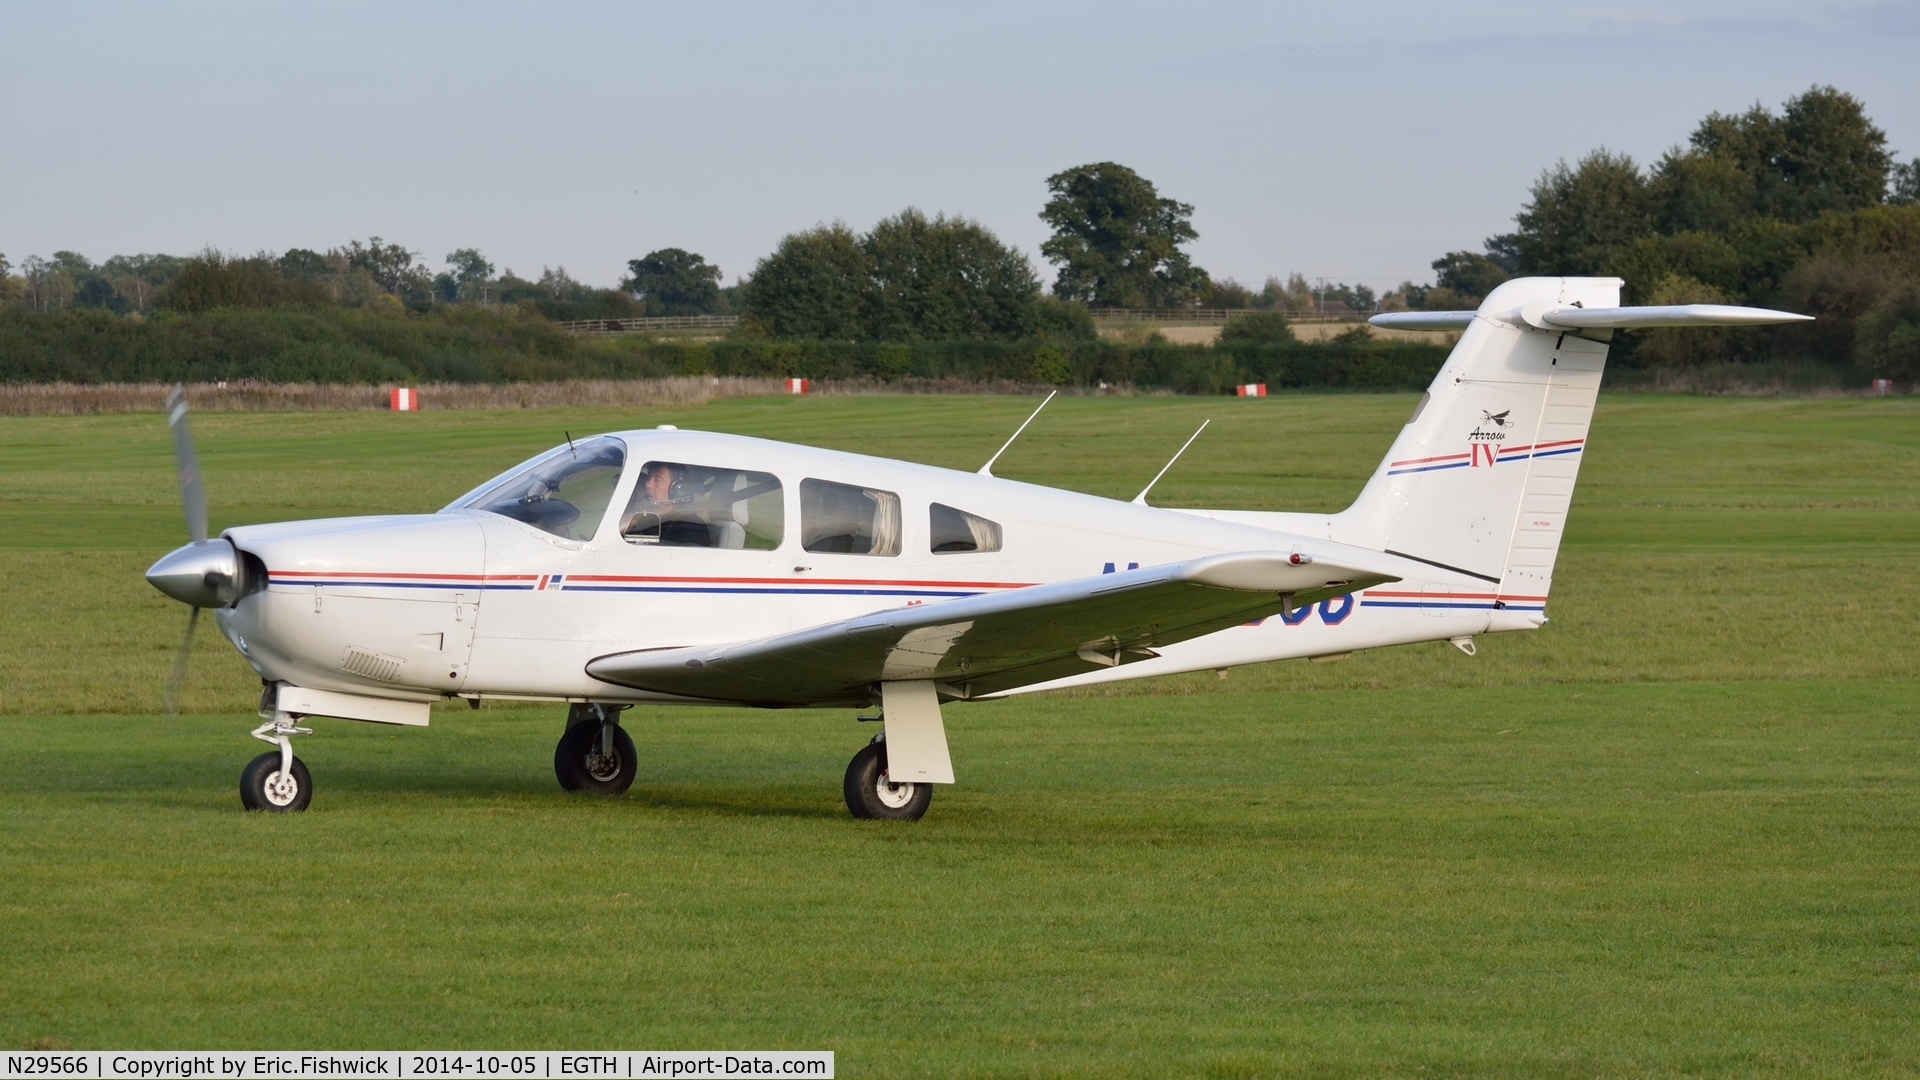 N29566, 1979 Piper PA-28RT-201 Arrow IV C/N 28R-7918146, 1. N29566 preparing to depart the rousing season finale Race Day Air Show at Shuttleworth, Oct. 2014